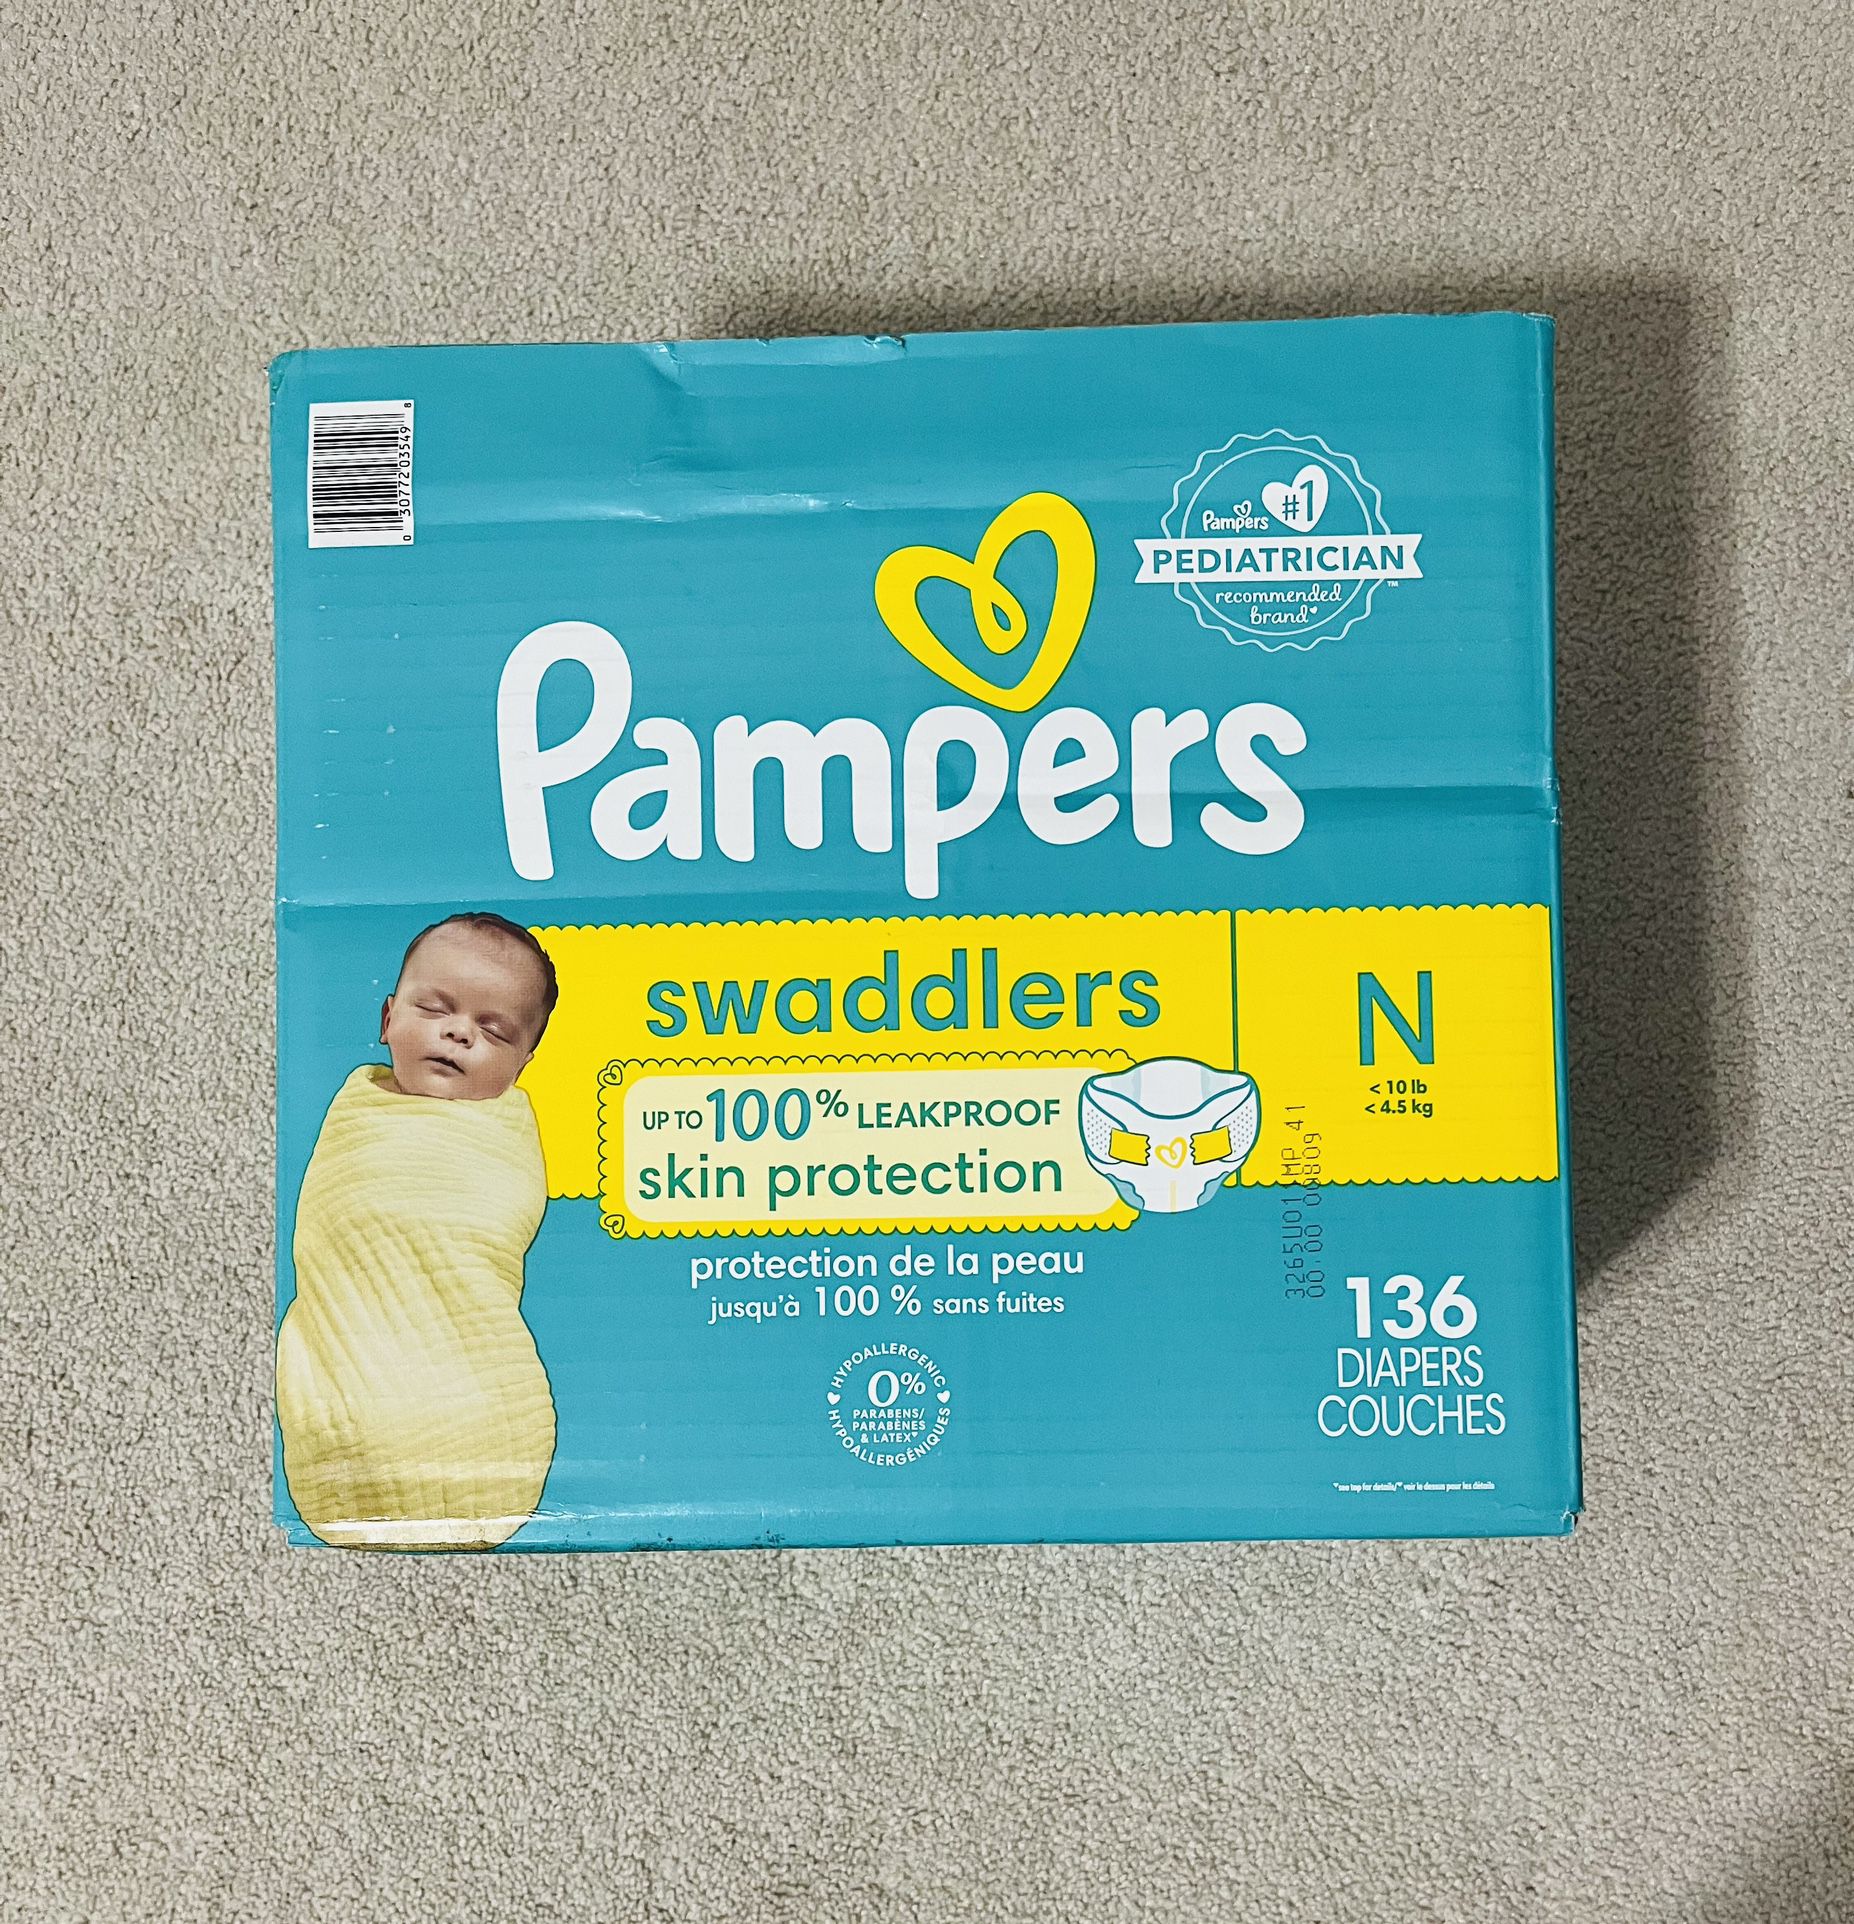 Pampers-Newborns-136 Counts- New  